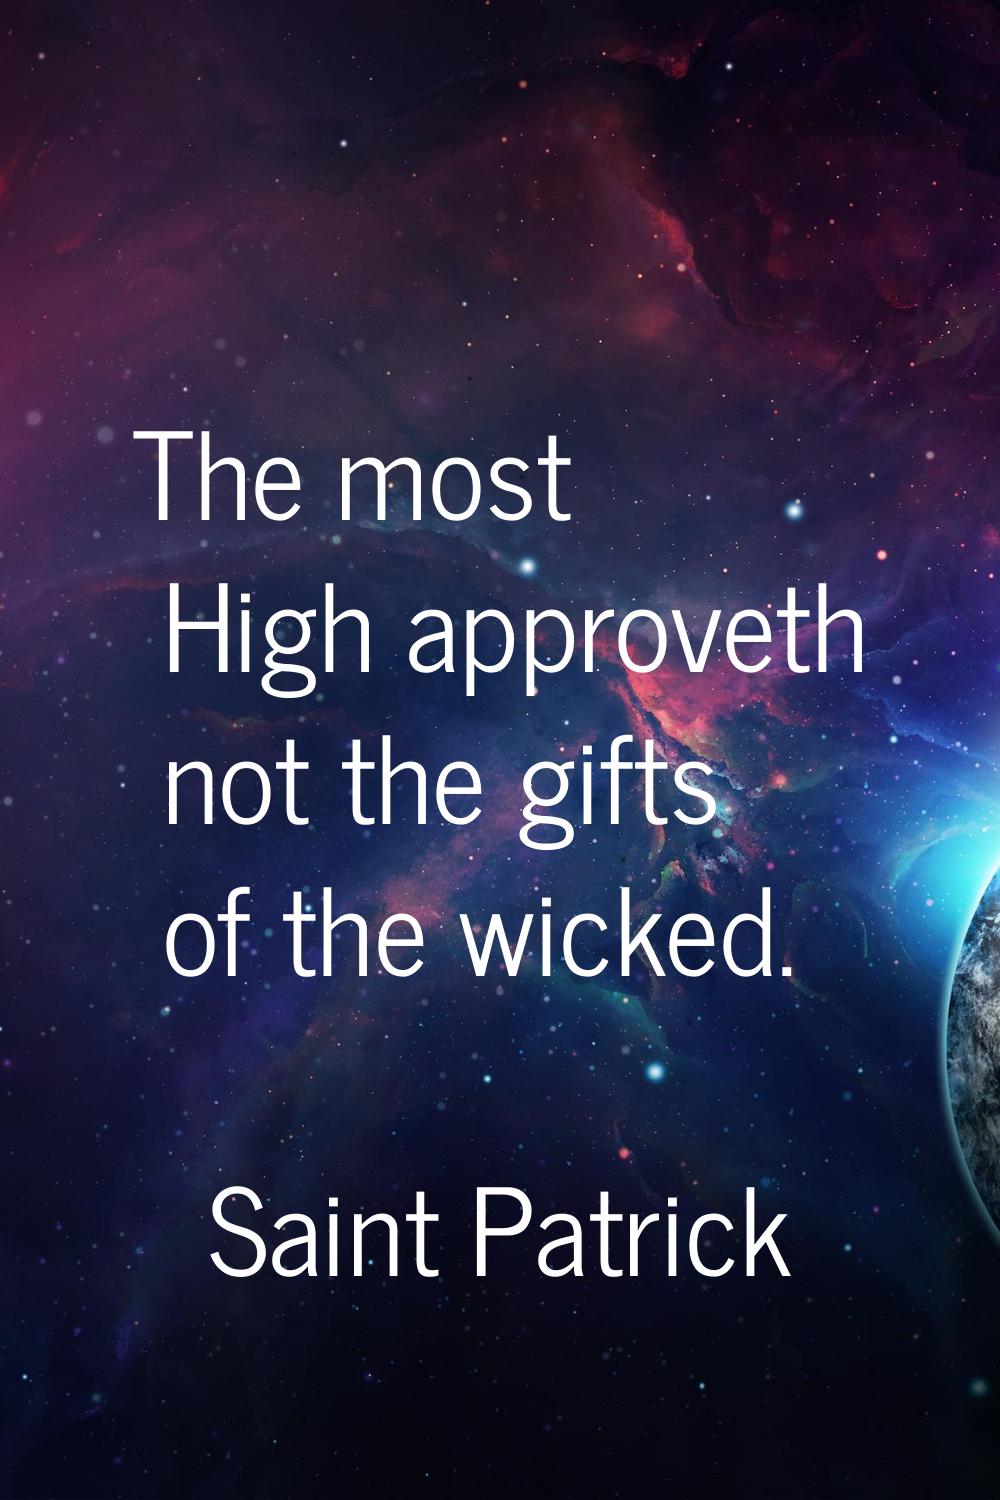 The most High approveth not the gifts of the wicked.